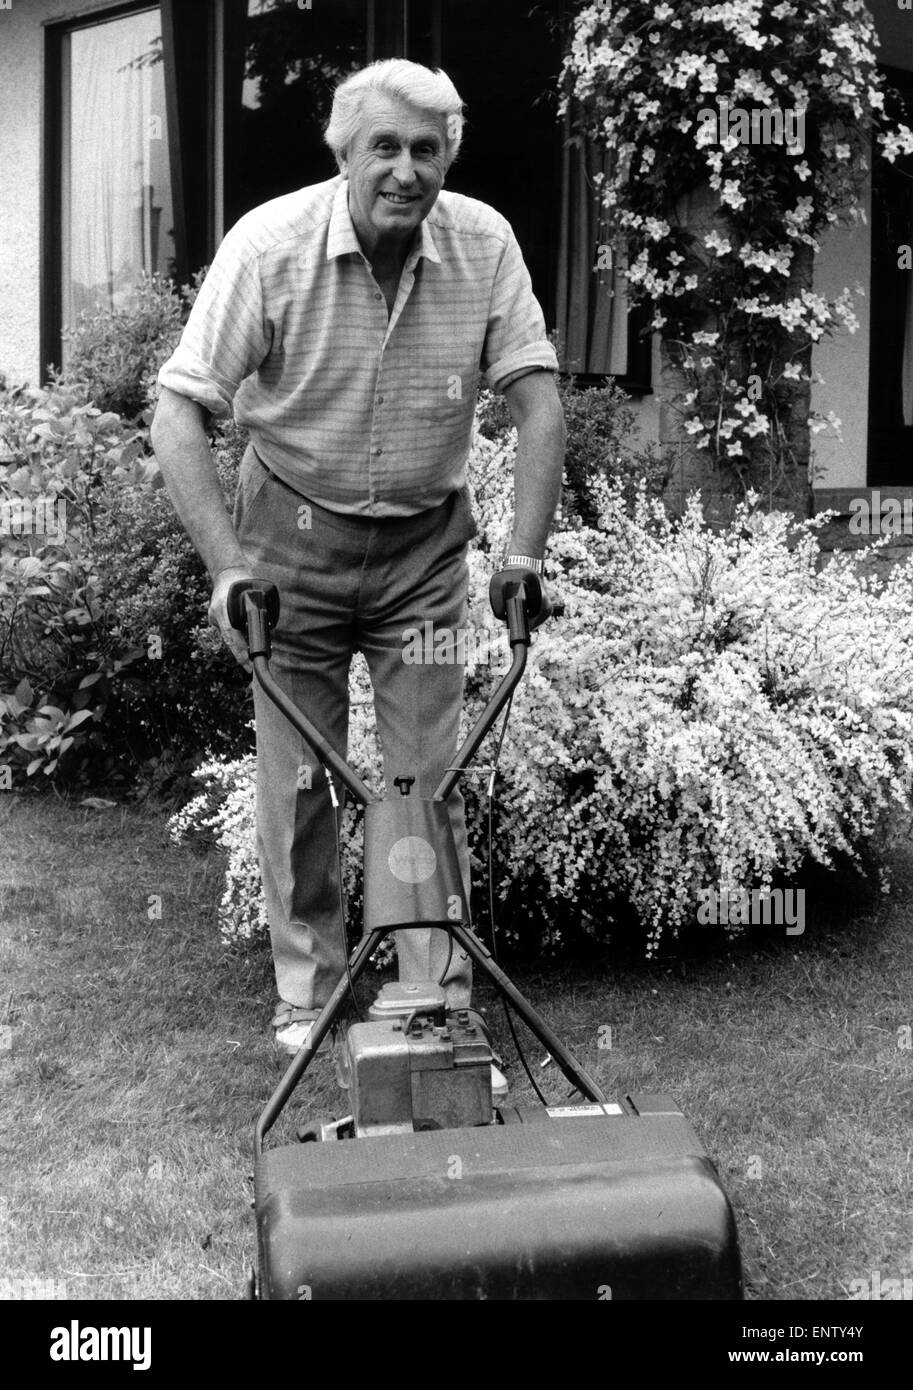 David Francey, former BBC Radio Sports Commentator, aged 63, relaxes in his garden after his recent retirement, May 1987. Stock Photo